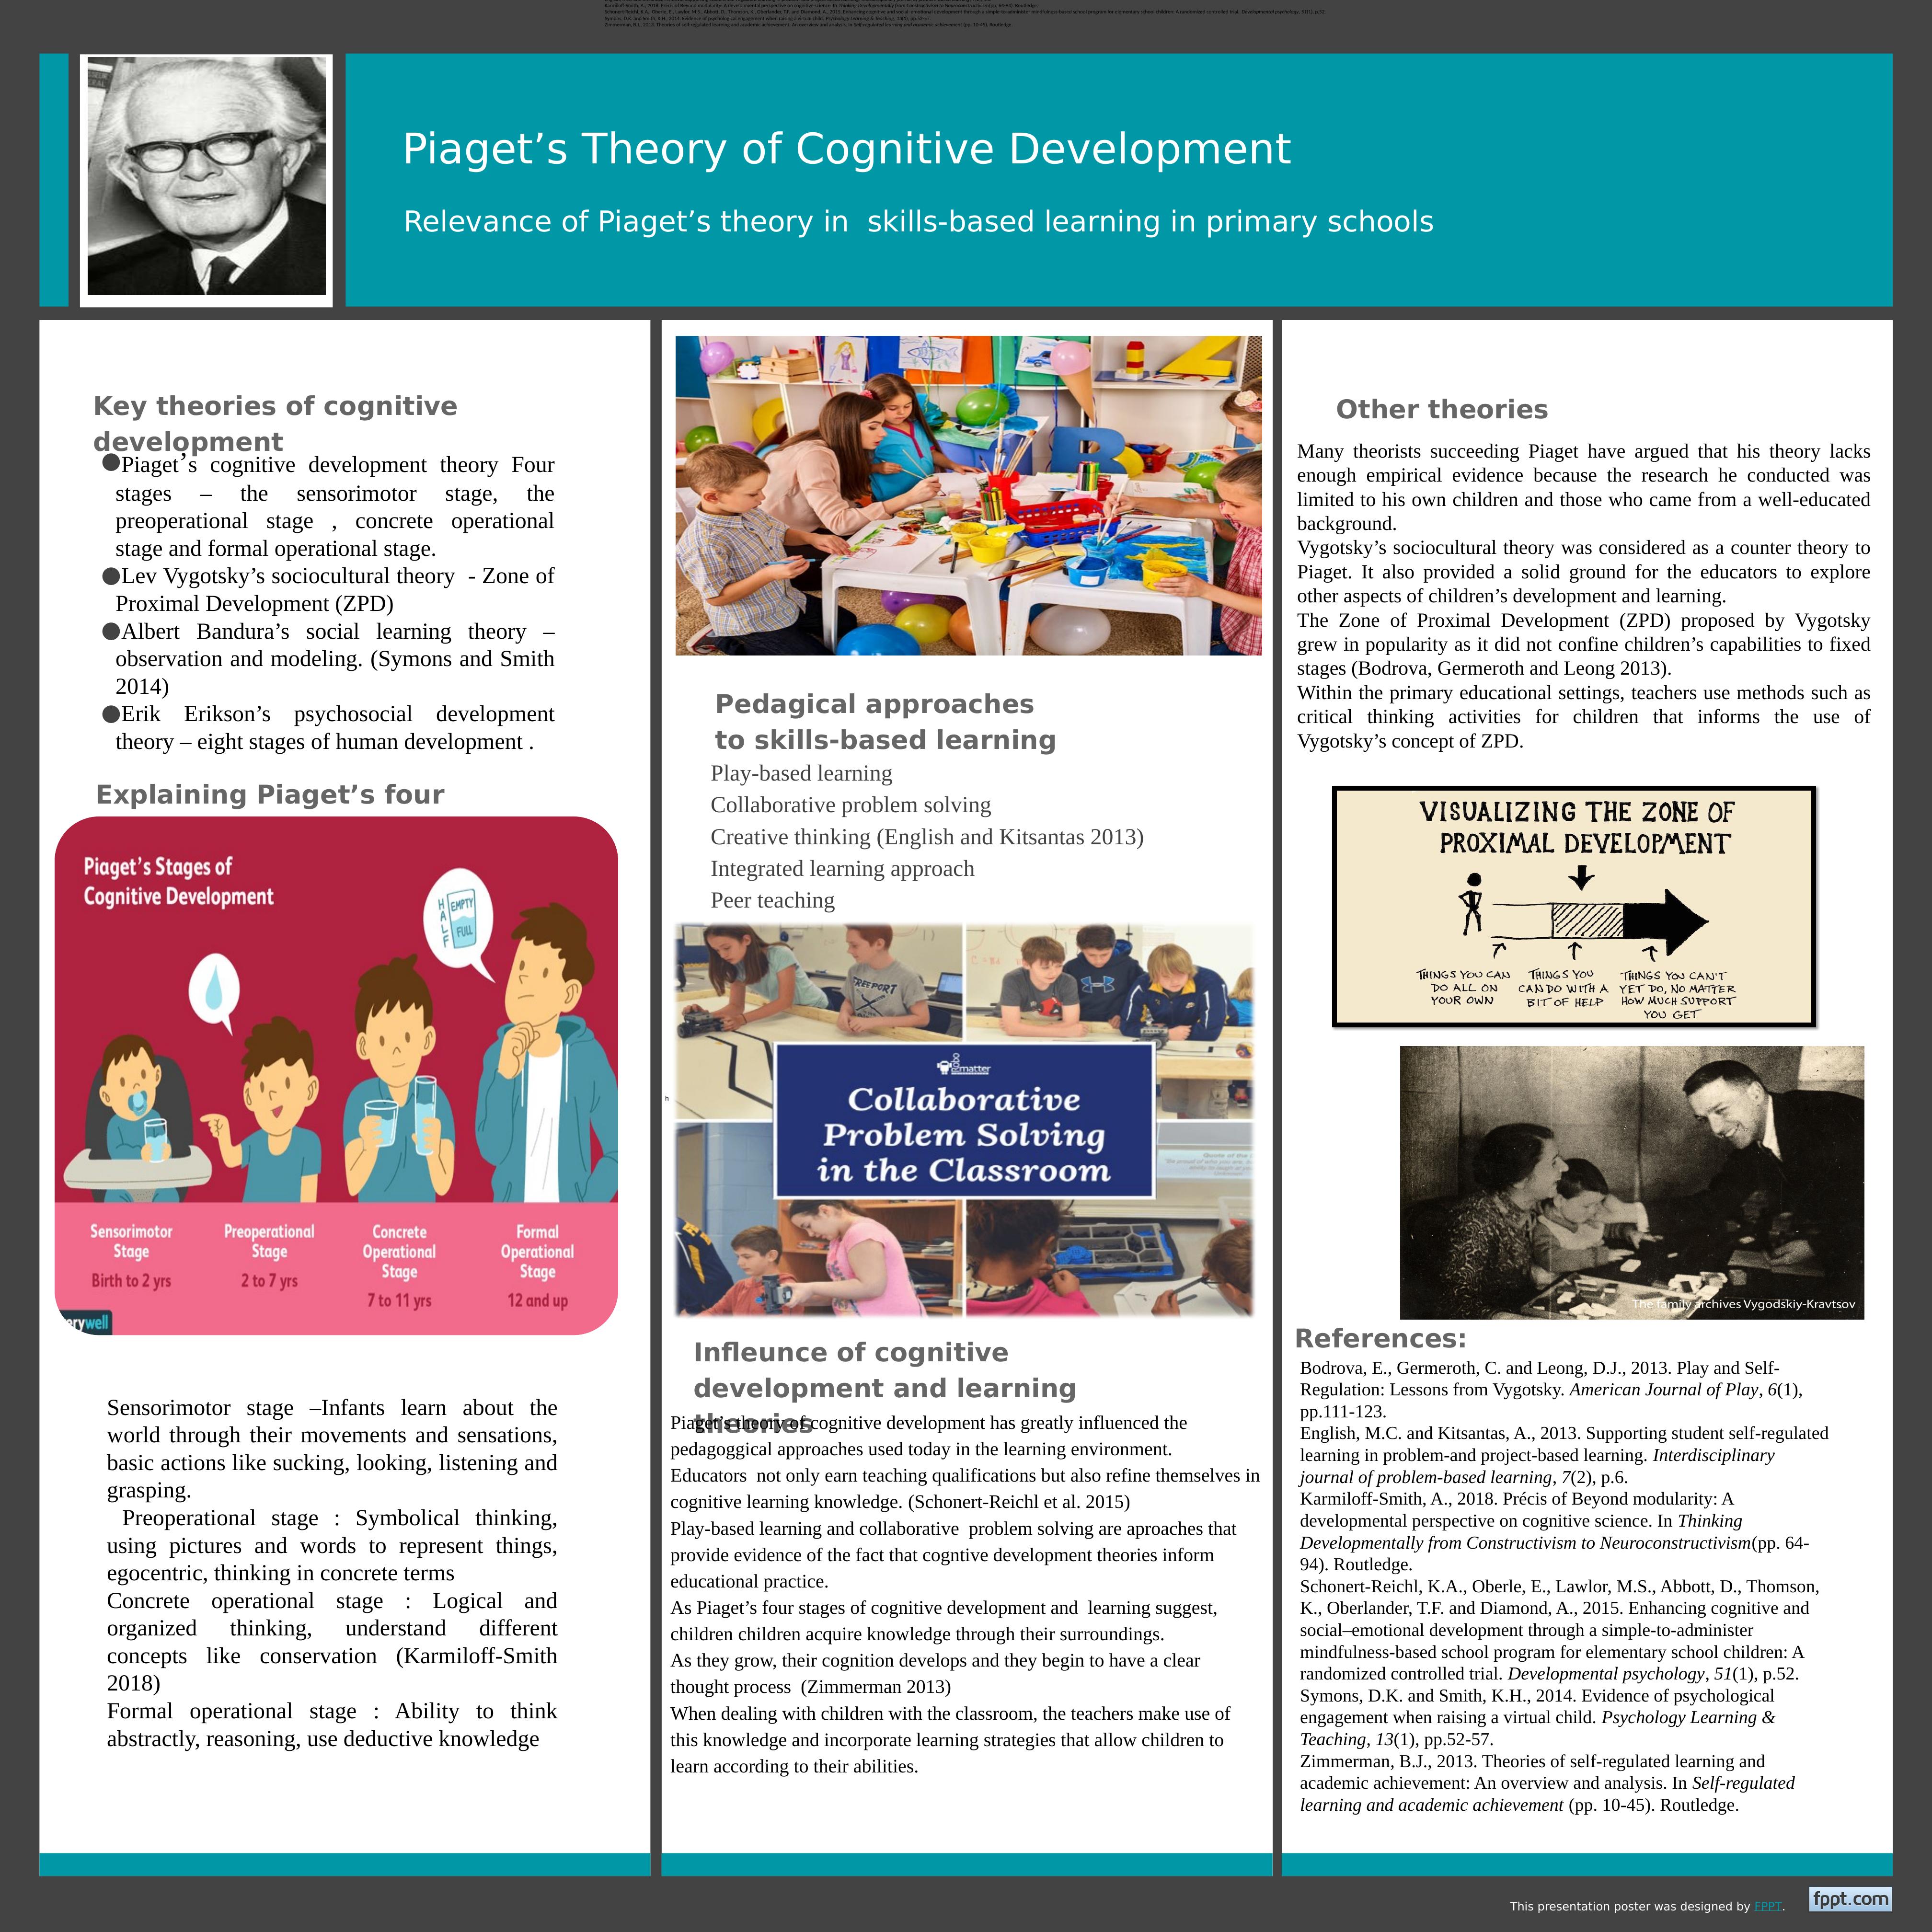 Piaget’s Theory of Cognitive Development_1